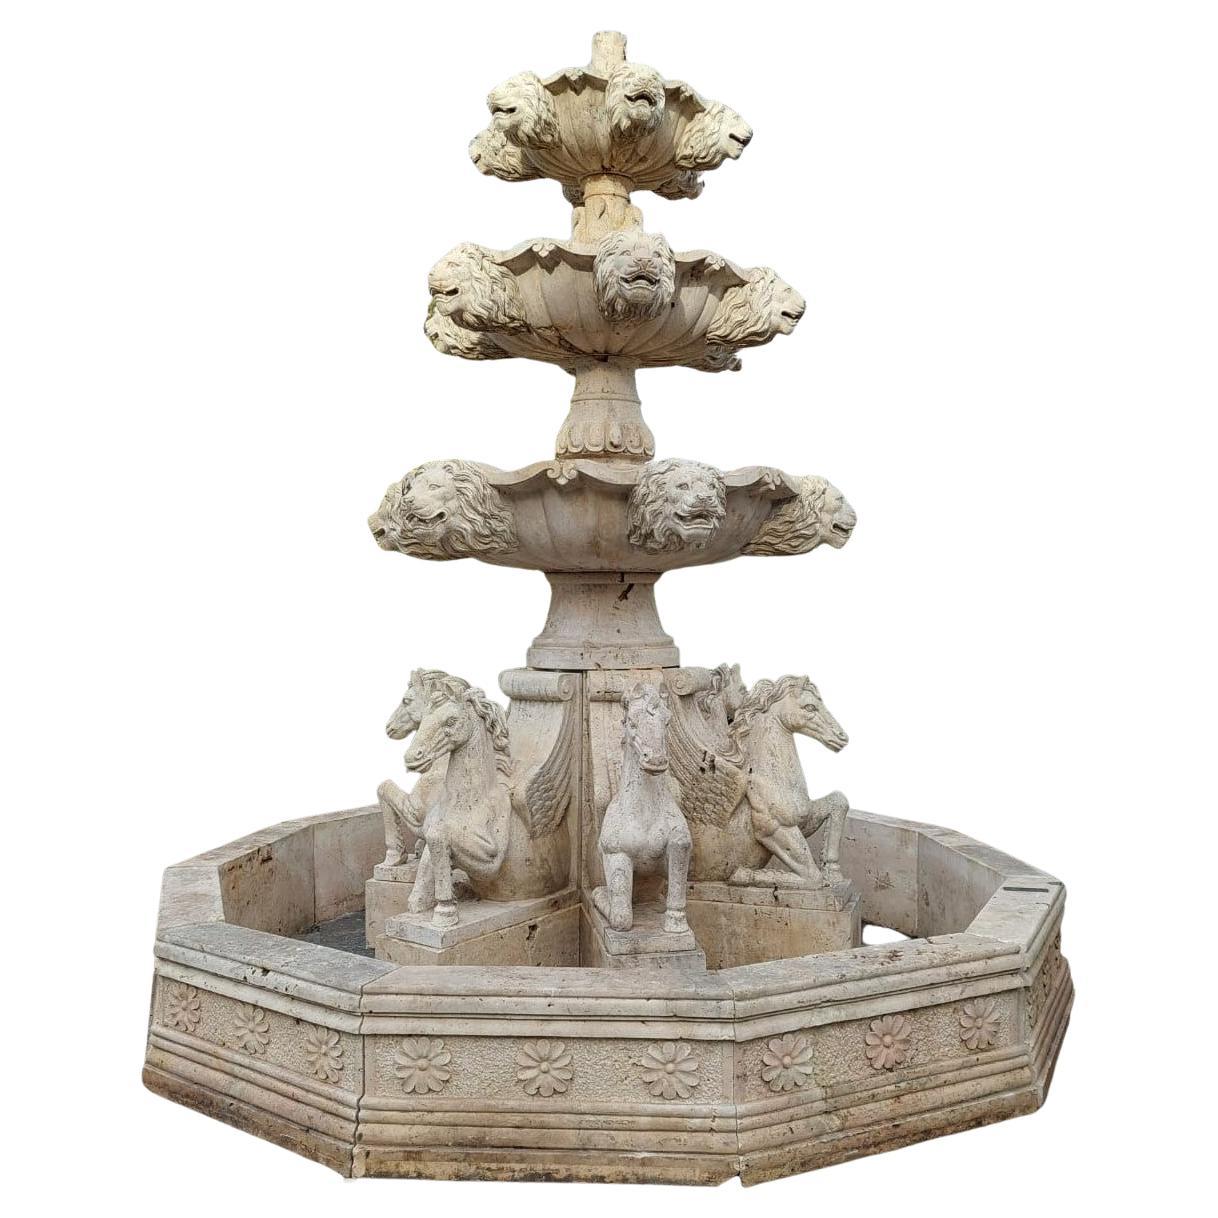 Big Fountain in Travertine Stone, Richly Carved with Rampant Horses, 1980 Italy